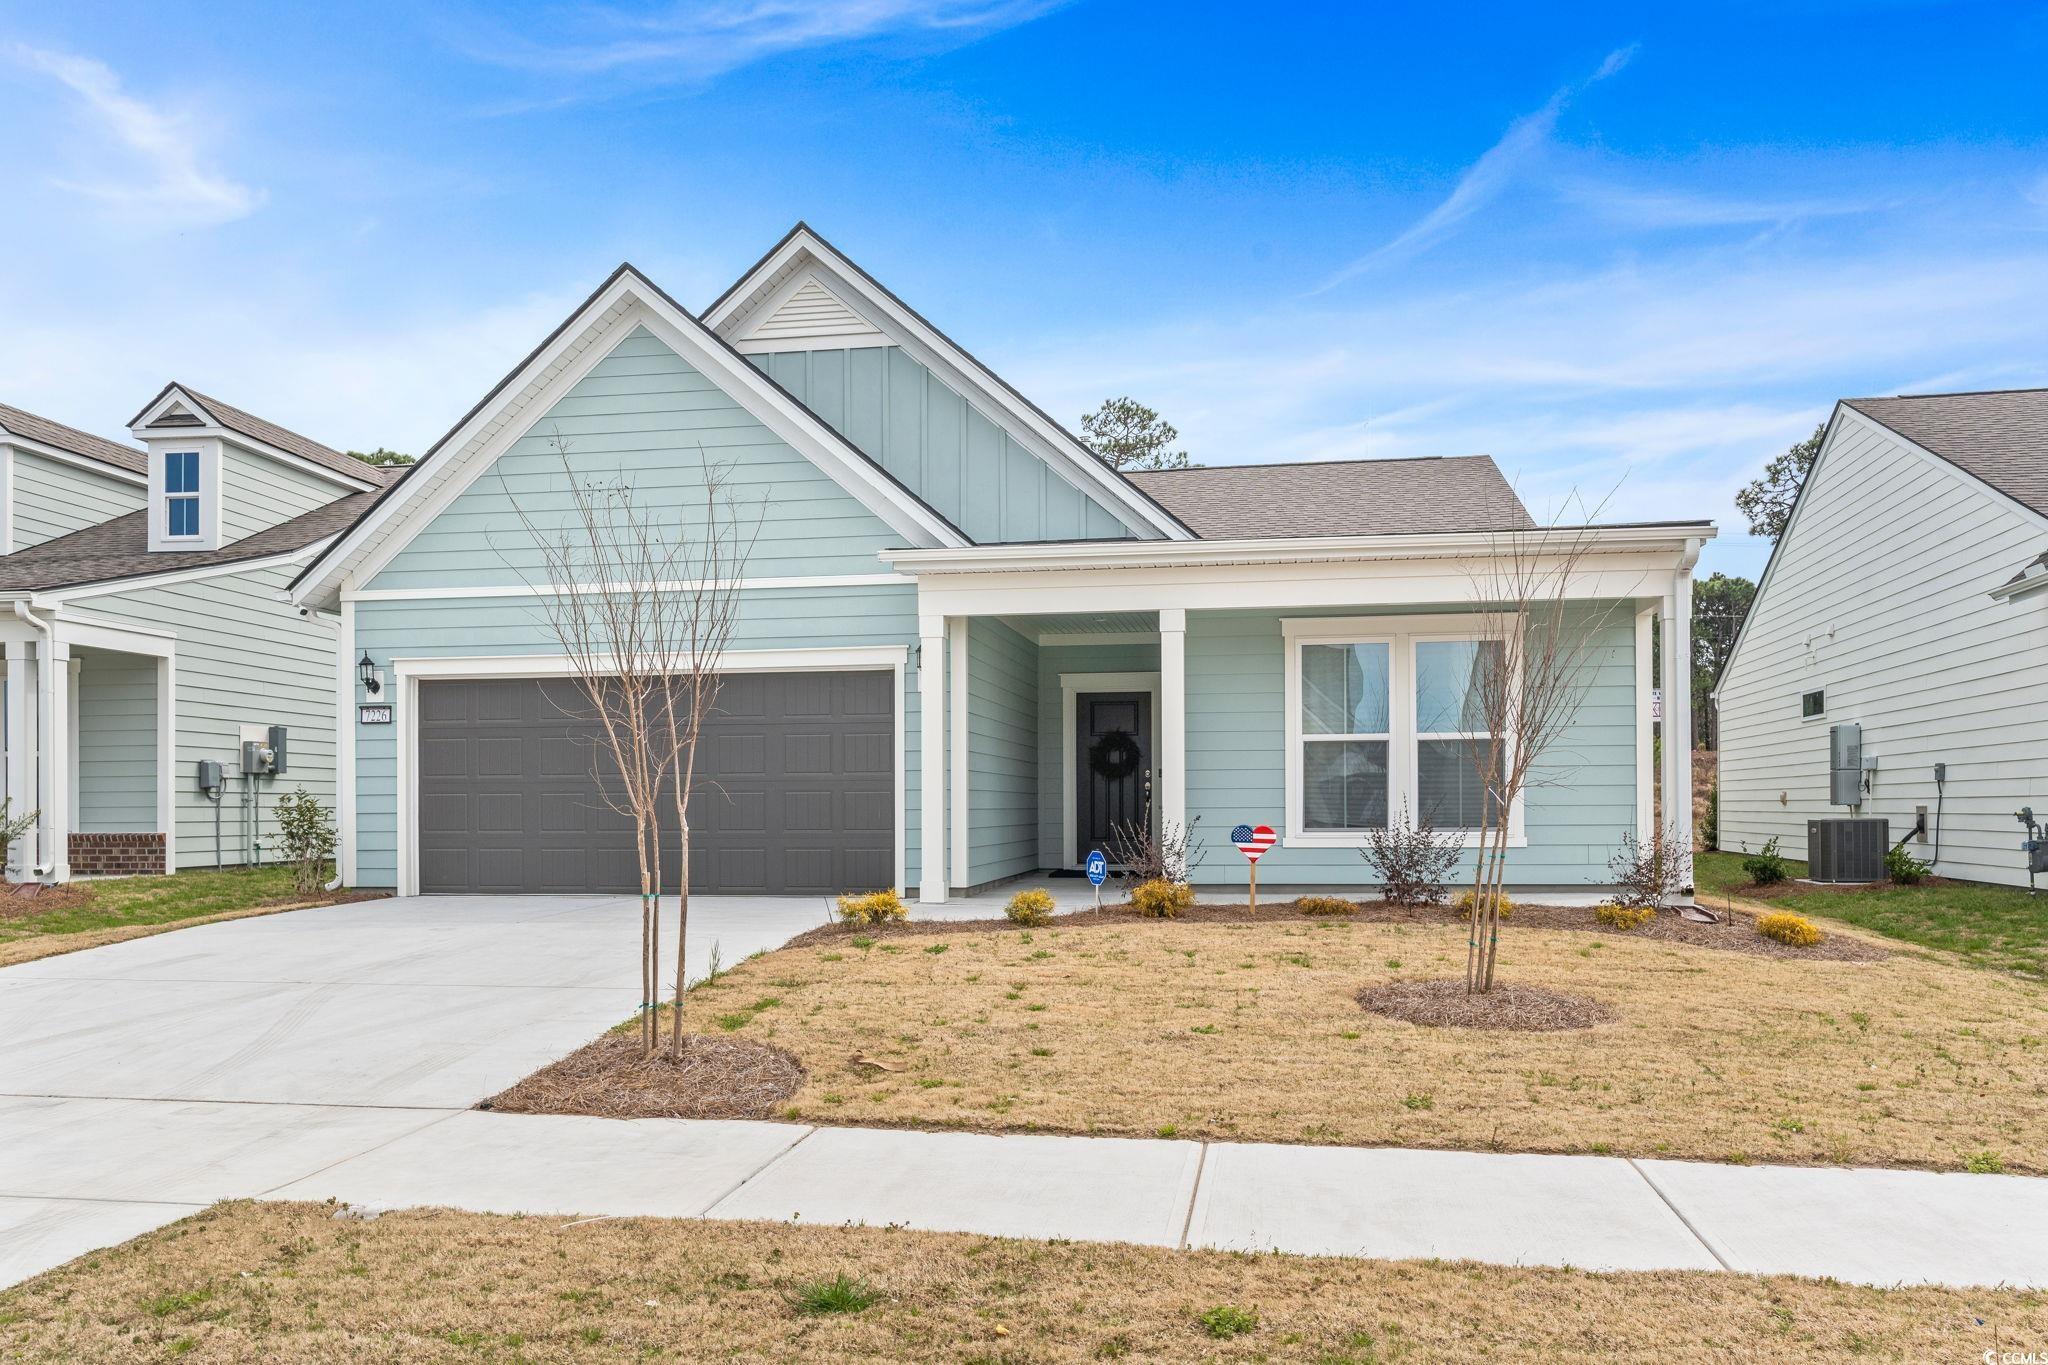 ***open house sun may 5th 1-3 pm***this del webb neighborhood boasts some of the area's finest amenities on the grand strand.  wait until you see the onsite amenity center featuring an indoor heated pool, outdoor pool, fitness center, tennis courts, pickle ball, bocce ball court, fire pit overlooking the intercoastal waterway, and day dock.  the residents at del webb grande dunes also have access to the grande dunes ocean club.  don't worry about your yard maintenance- it is done for you!  when you're ready hop on your golf cart and you can go directly to the ocean club or just roam the neighborhood.  this is home has only been used a couple of times by the owners and has many upgrades that you will want to see. the primary bedroom is your private getaway with tray ceilings and a spacious walk-in closet. the primary bathroom boasts a massive walk-in shower with a rainfall shower head and double vanities.  if you love to cook, the gourmet kitchen showcases upgraded cabinets with state-of-the-art appliances, beautiful quartz countertops and a large walk-in pantry.  don't forget to take a look at the upgraded slider leading from the dining area to the screened in back patio.  the garage is massive, with an extended area that could be used for your golf cart or for a workshop.  what are you waiting for live the life of leisure and enjoy life to the fullest at the del webb- grande dunes community!  home has had security system installed by adt and will stay with the home.